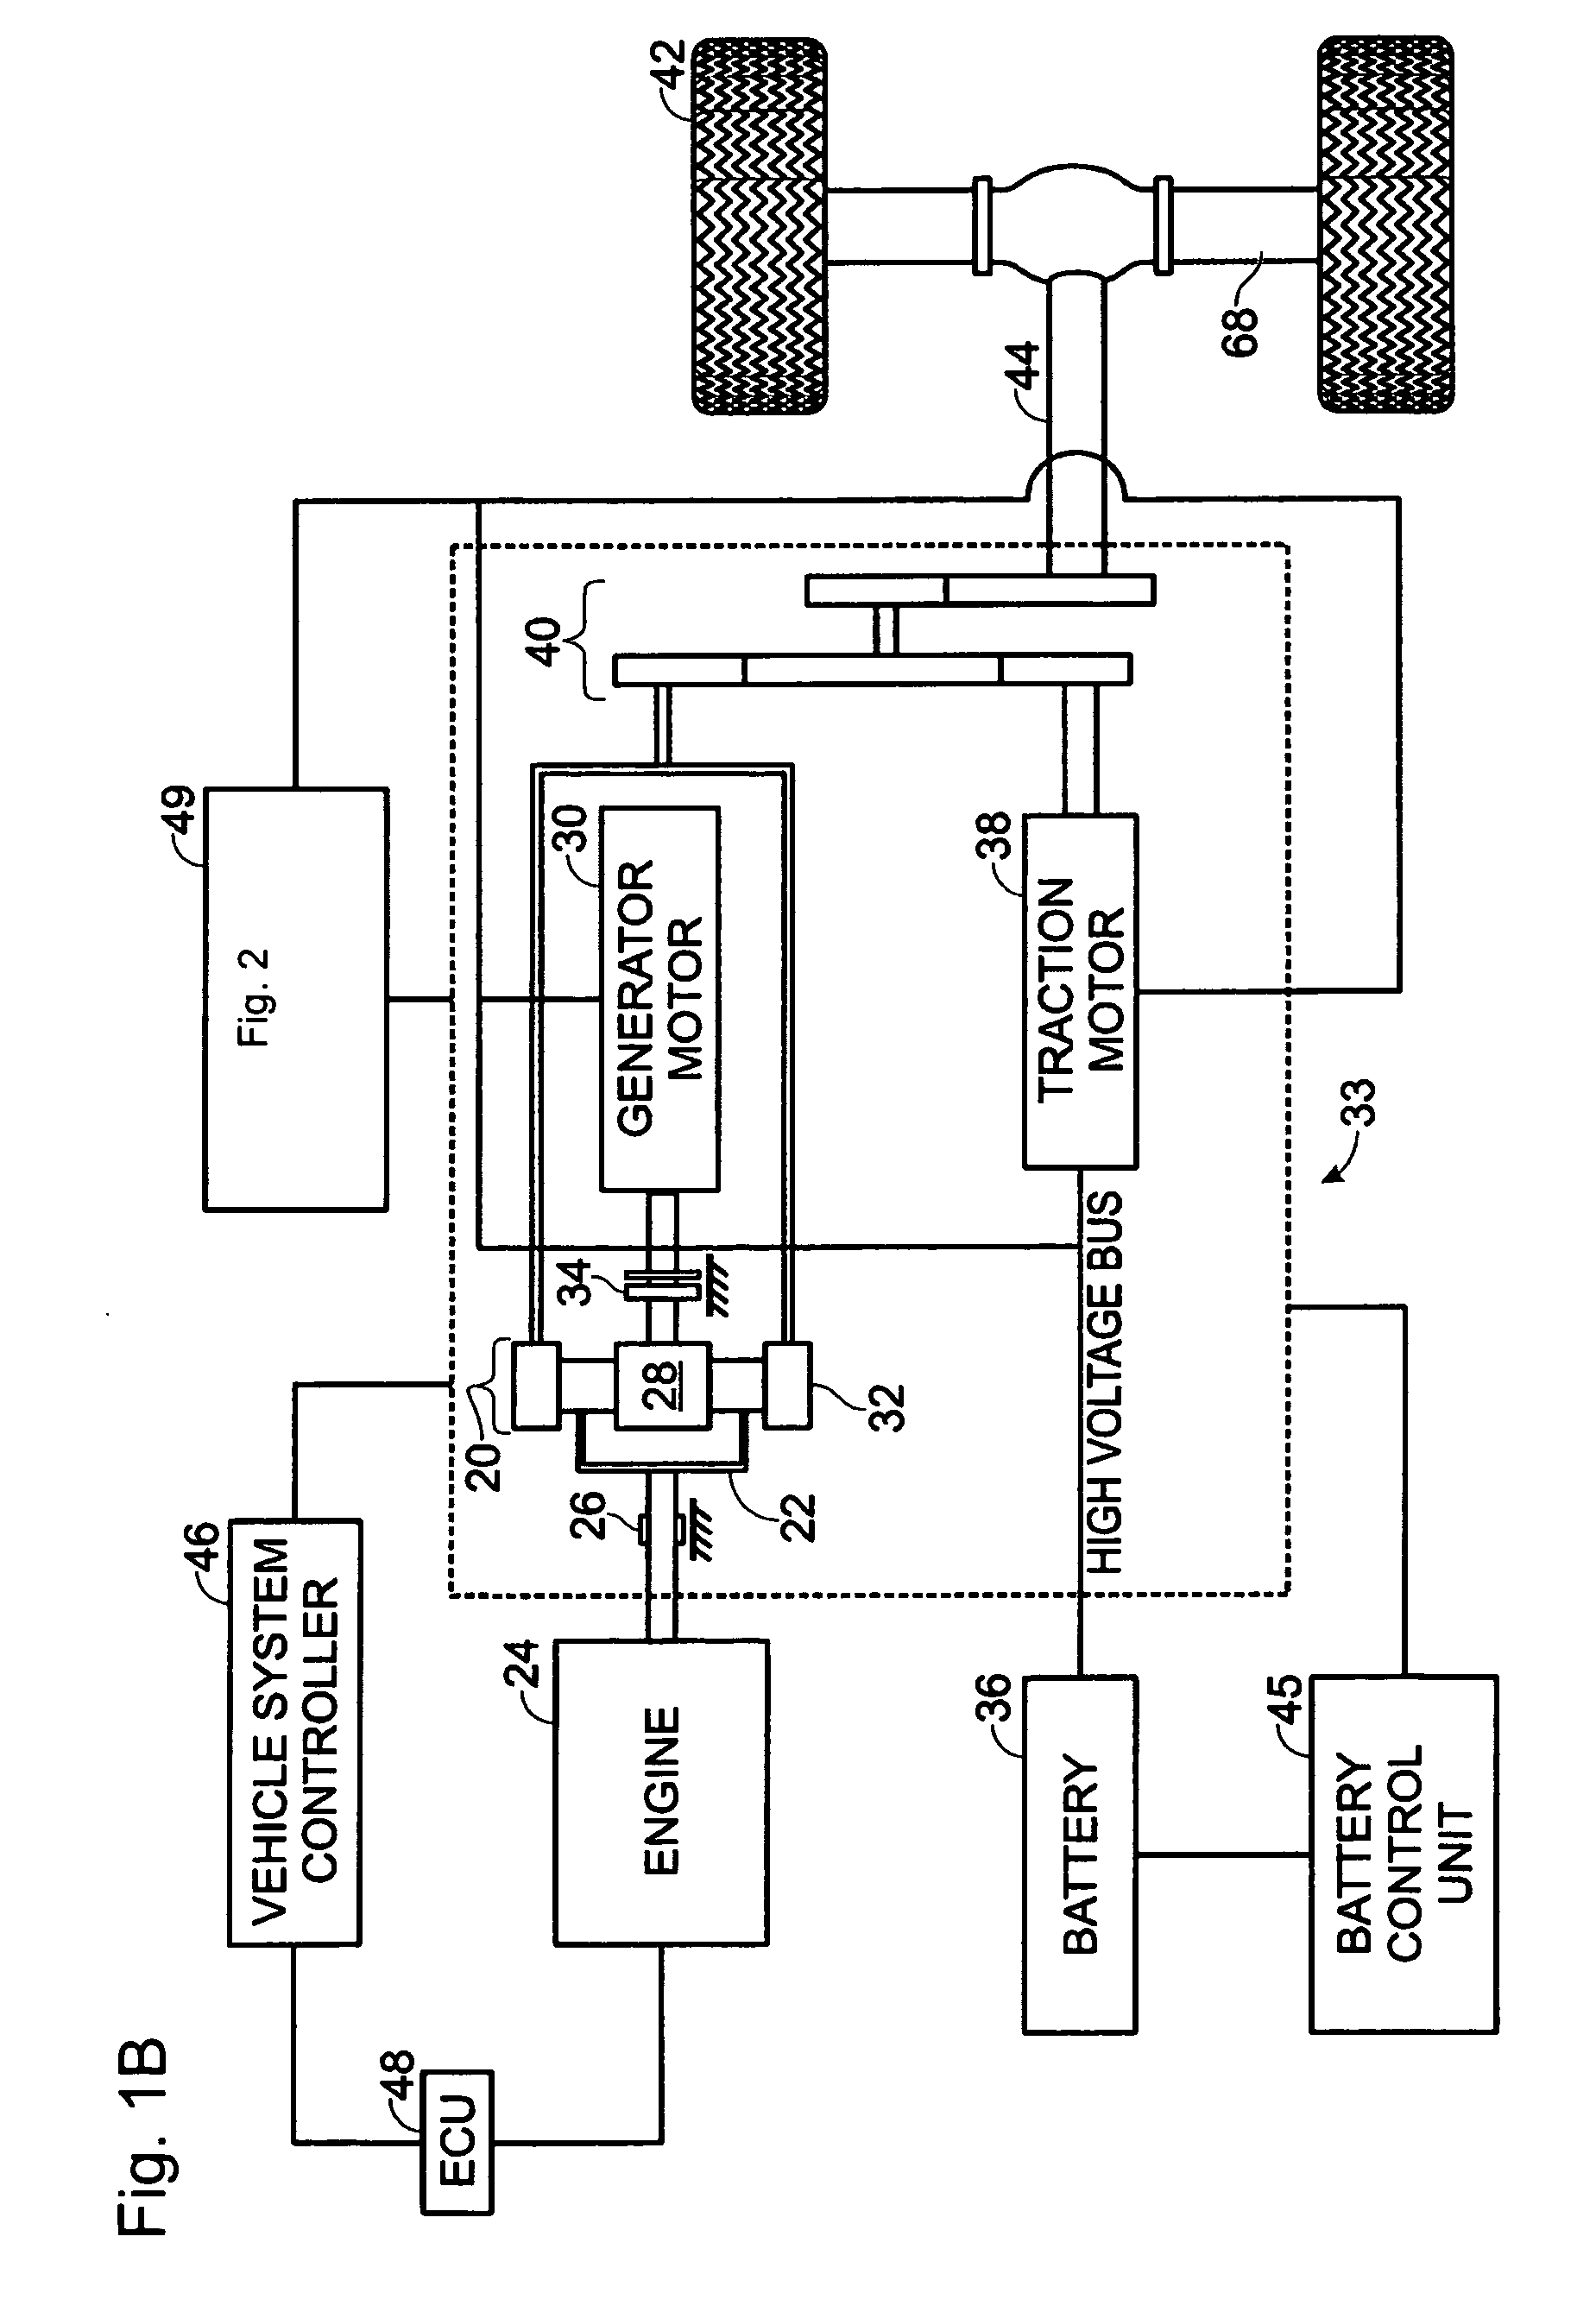 System and method for controlling vehicle operation in response to fuel vapor purging